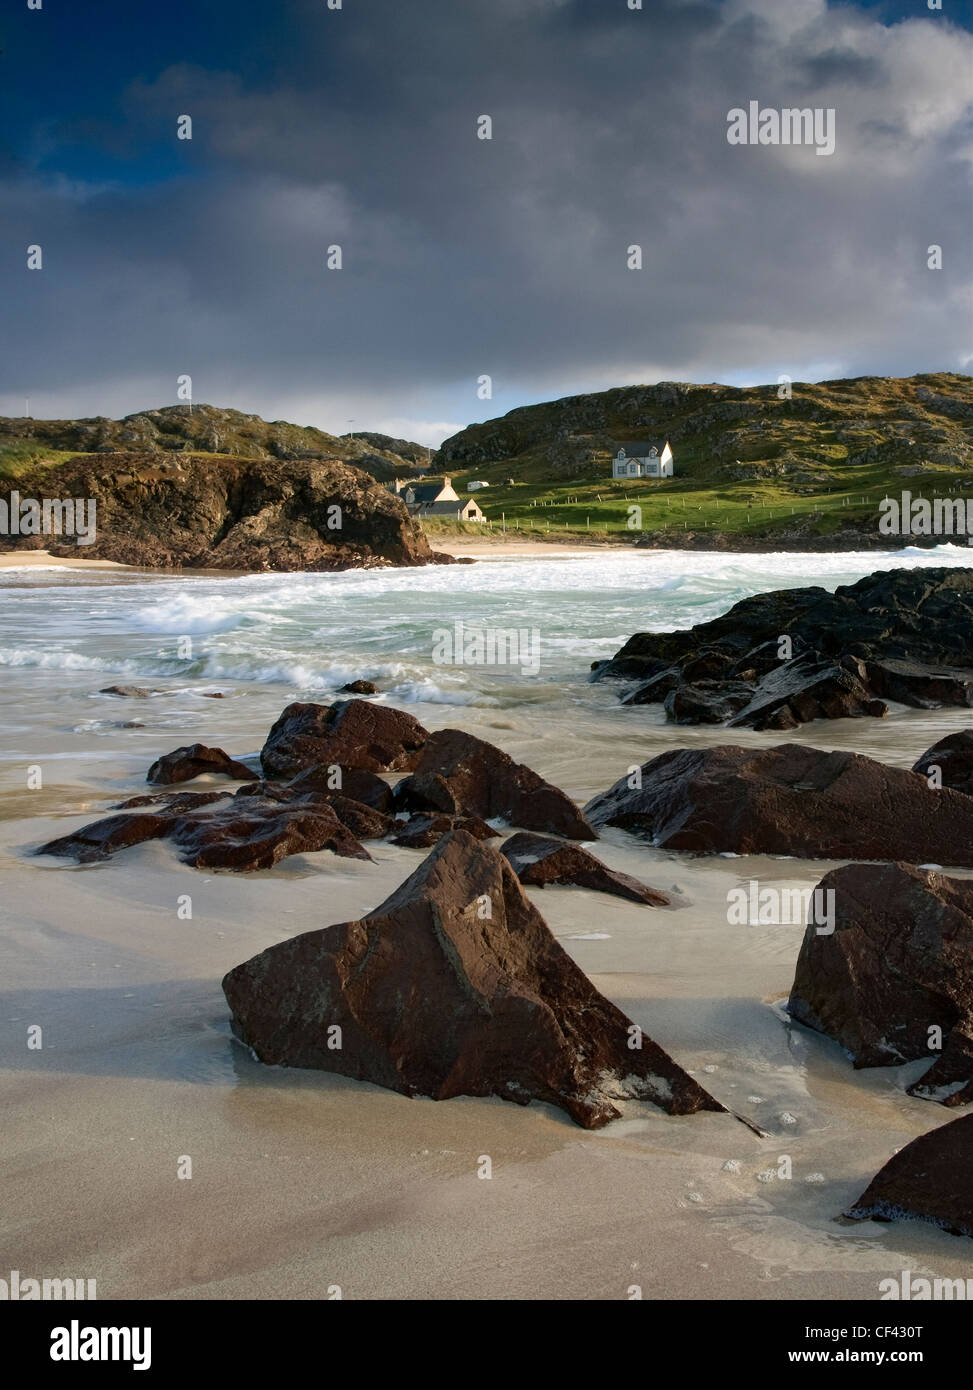 Waves roll in onto the shore during high tide at the remote and picturesque Clachtoll Bay. Stock Photo